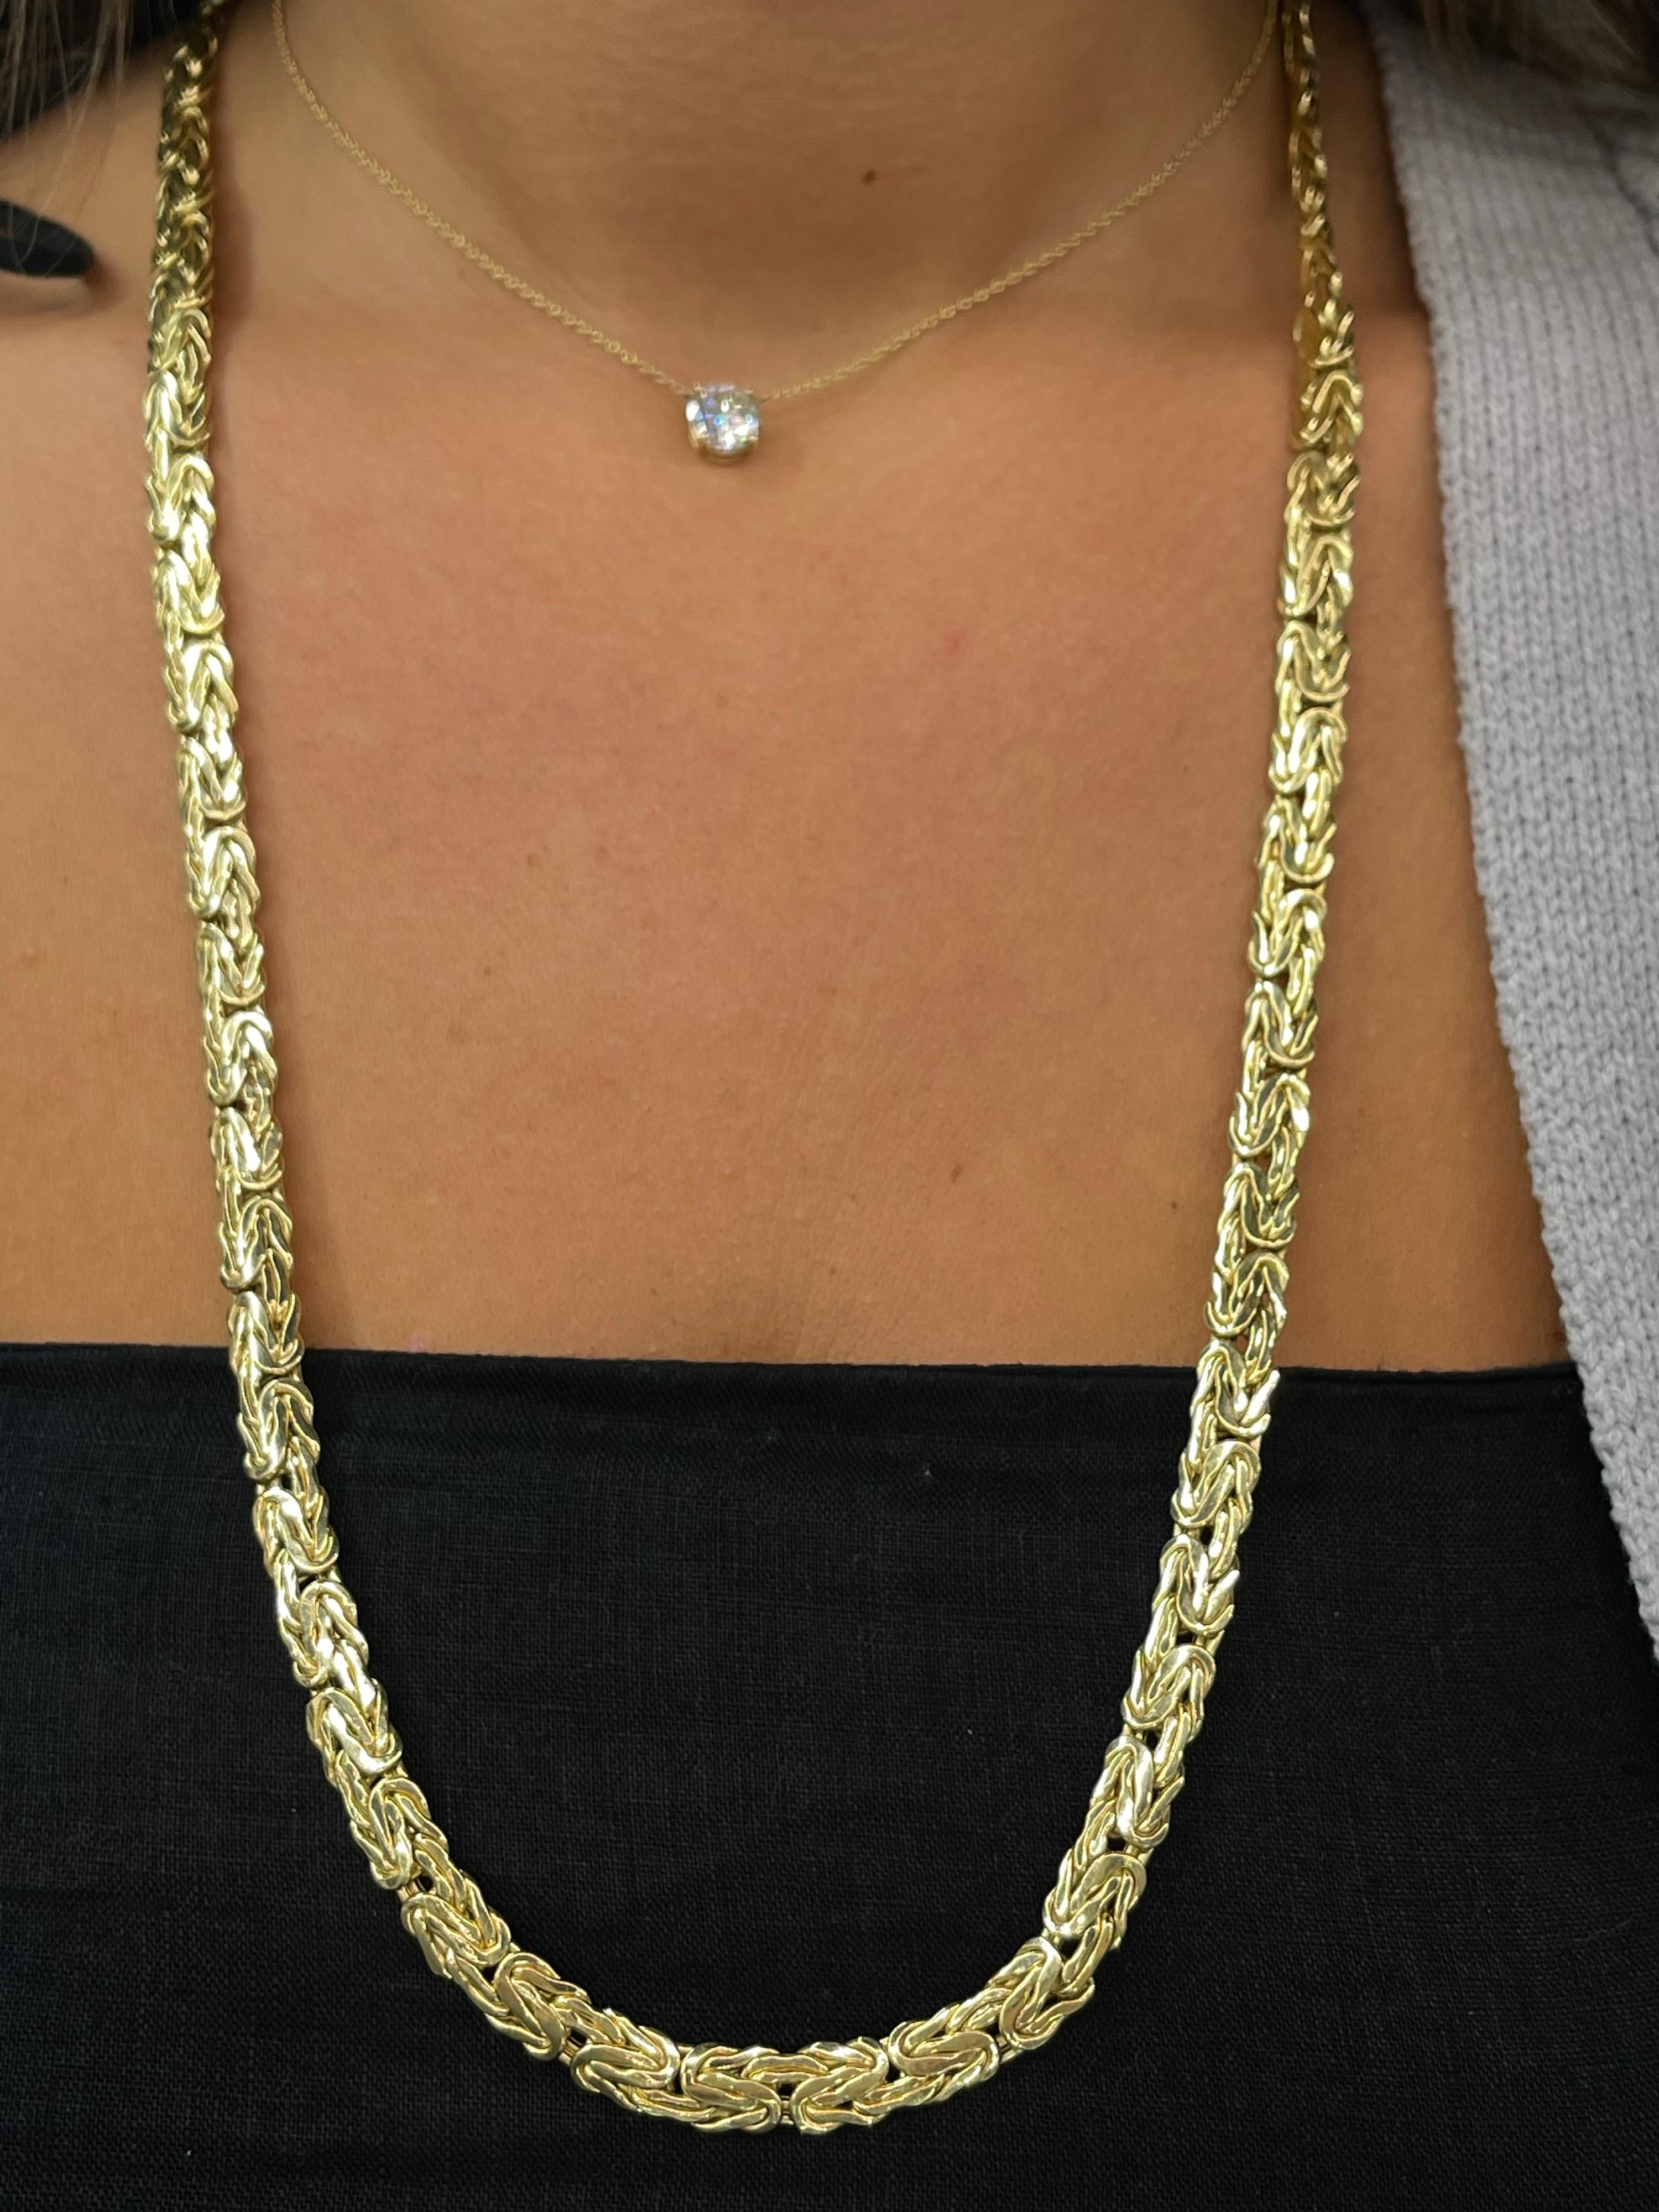 Interlocking Chain Gold Necklace 29 Inches 14 Karat Yellow Gold 54 Grams For Sale 1